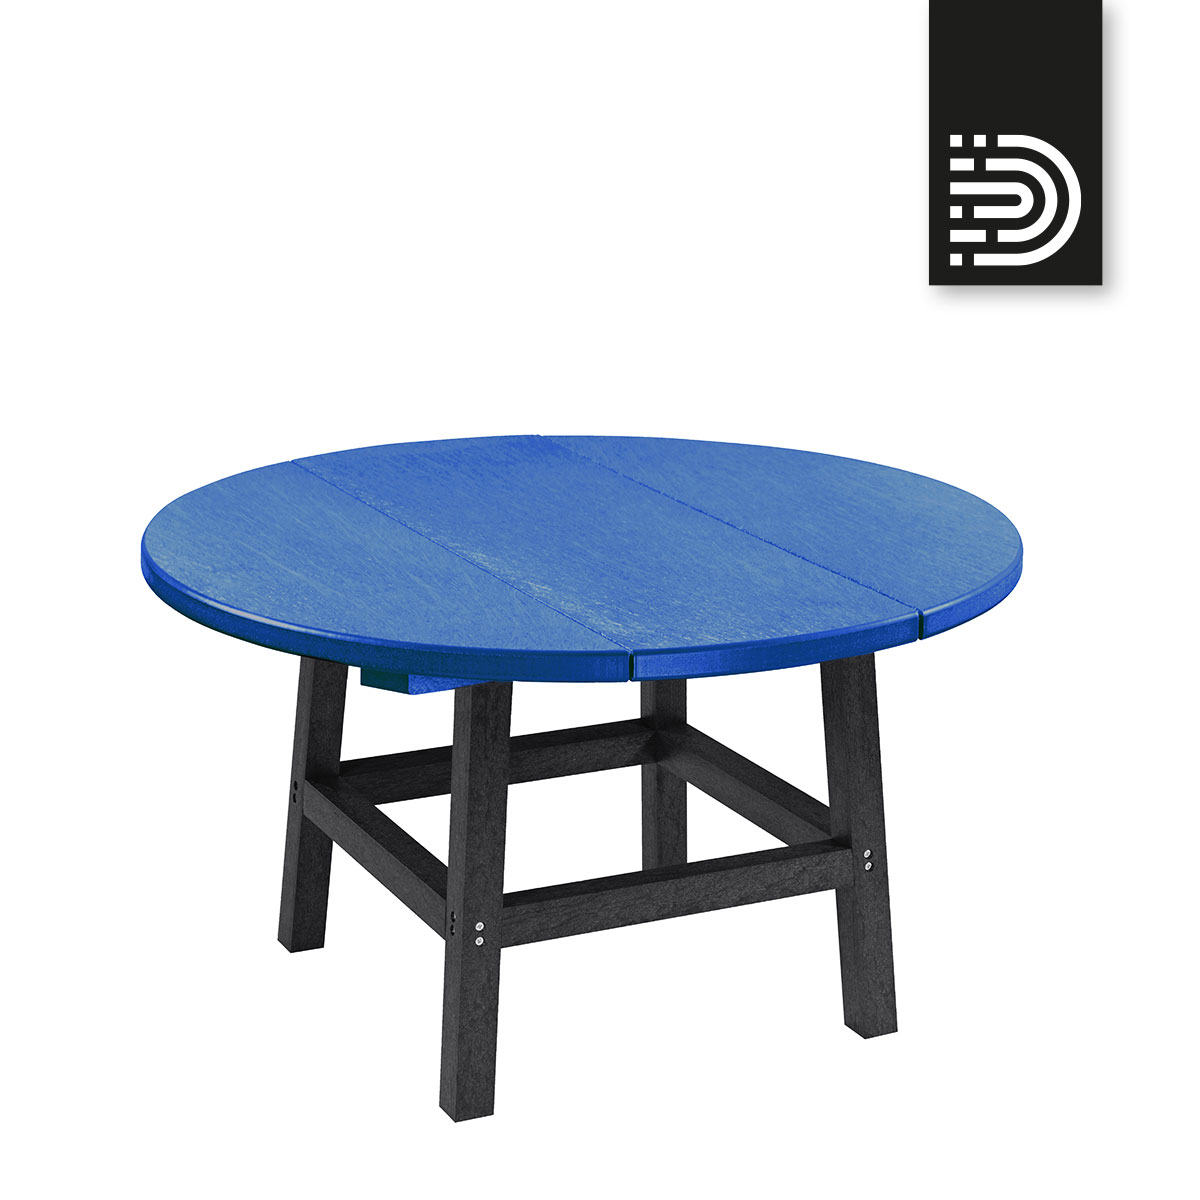 Cocktail Table in 14/03 - TB01+TT03/02